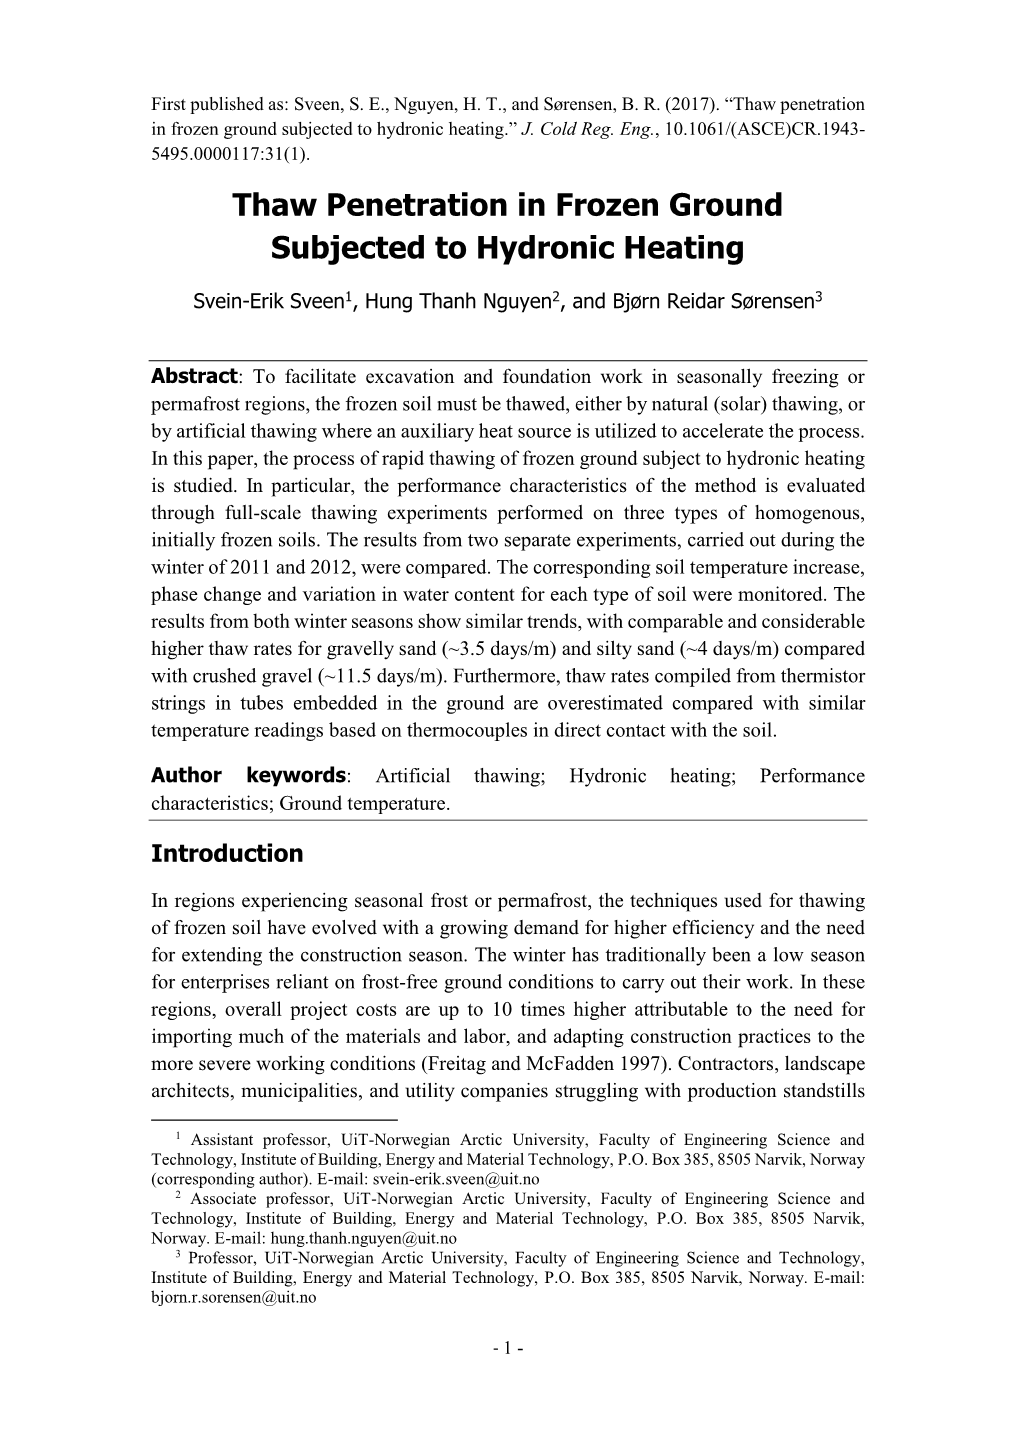 Thaw Penetration in Frozen Ground Subjected to Hydronic Heating.” J